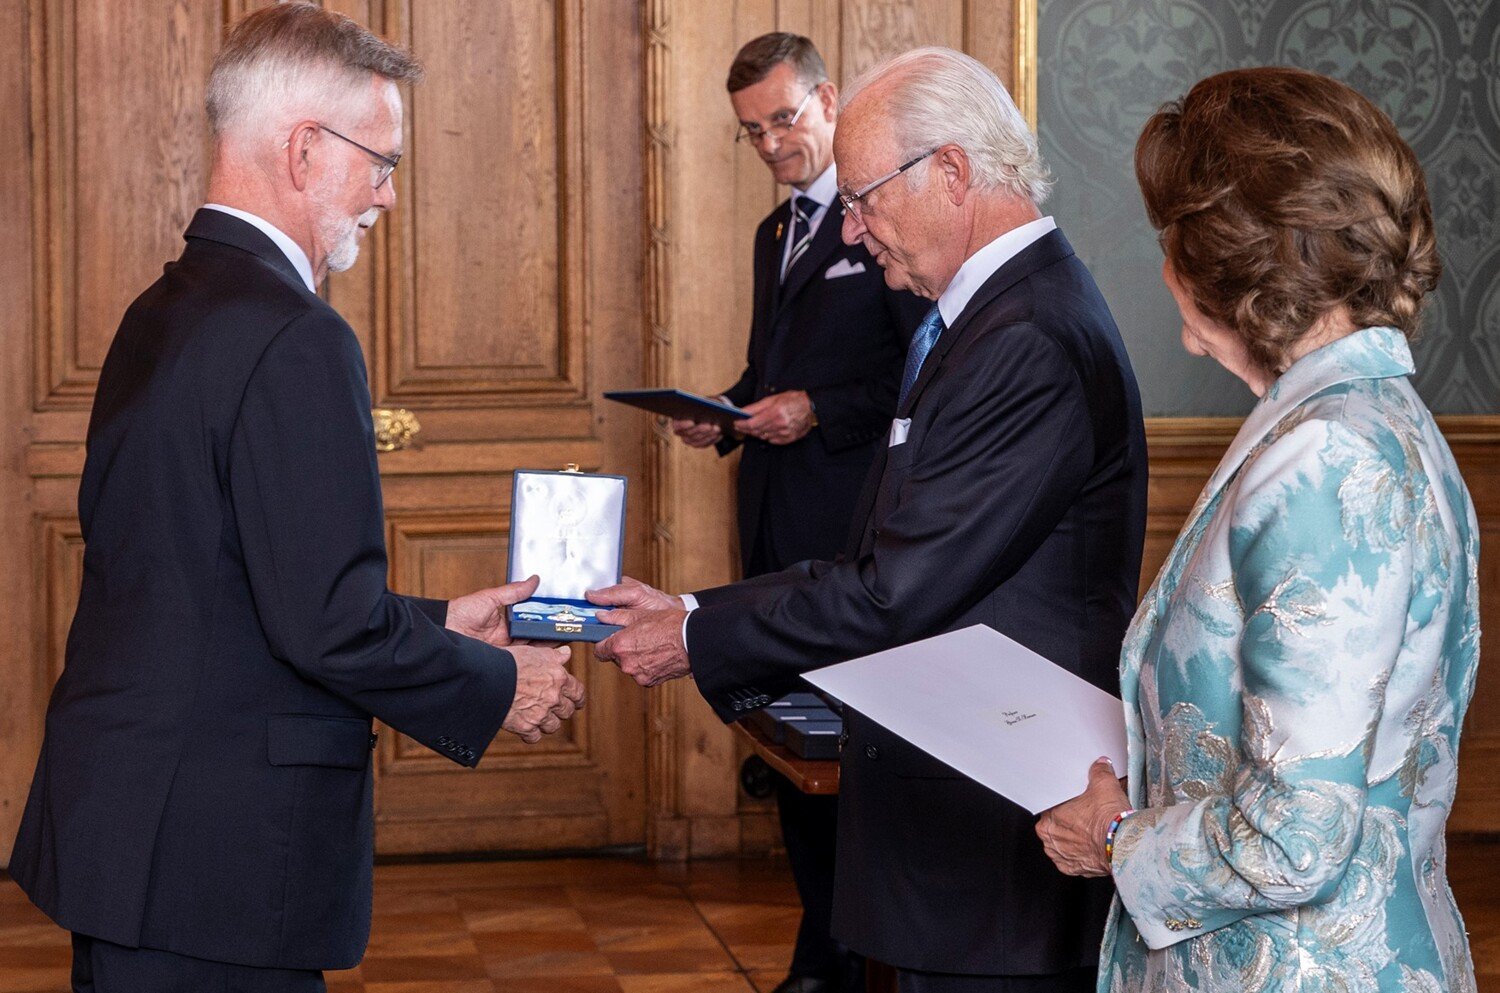 Professor Göran K Hansson receives his medal from The King, with Queen Silvia beside him.